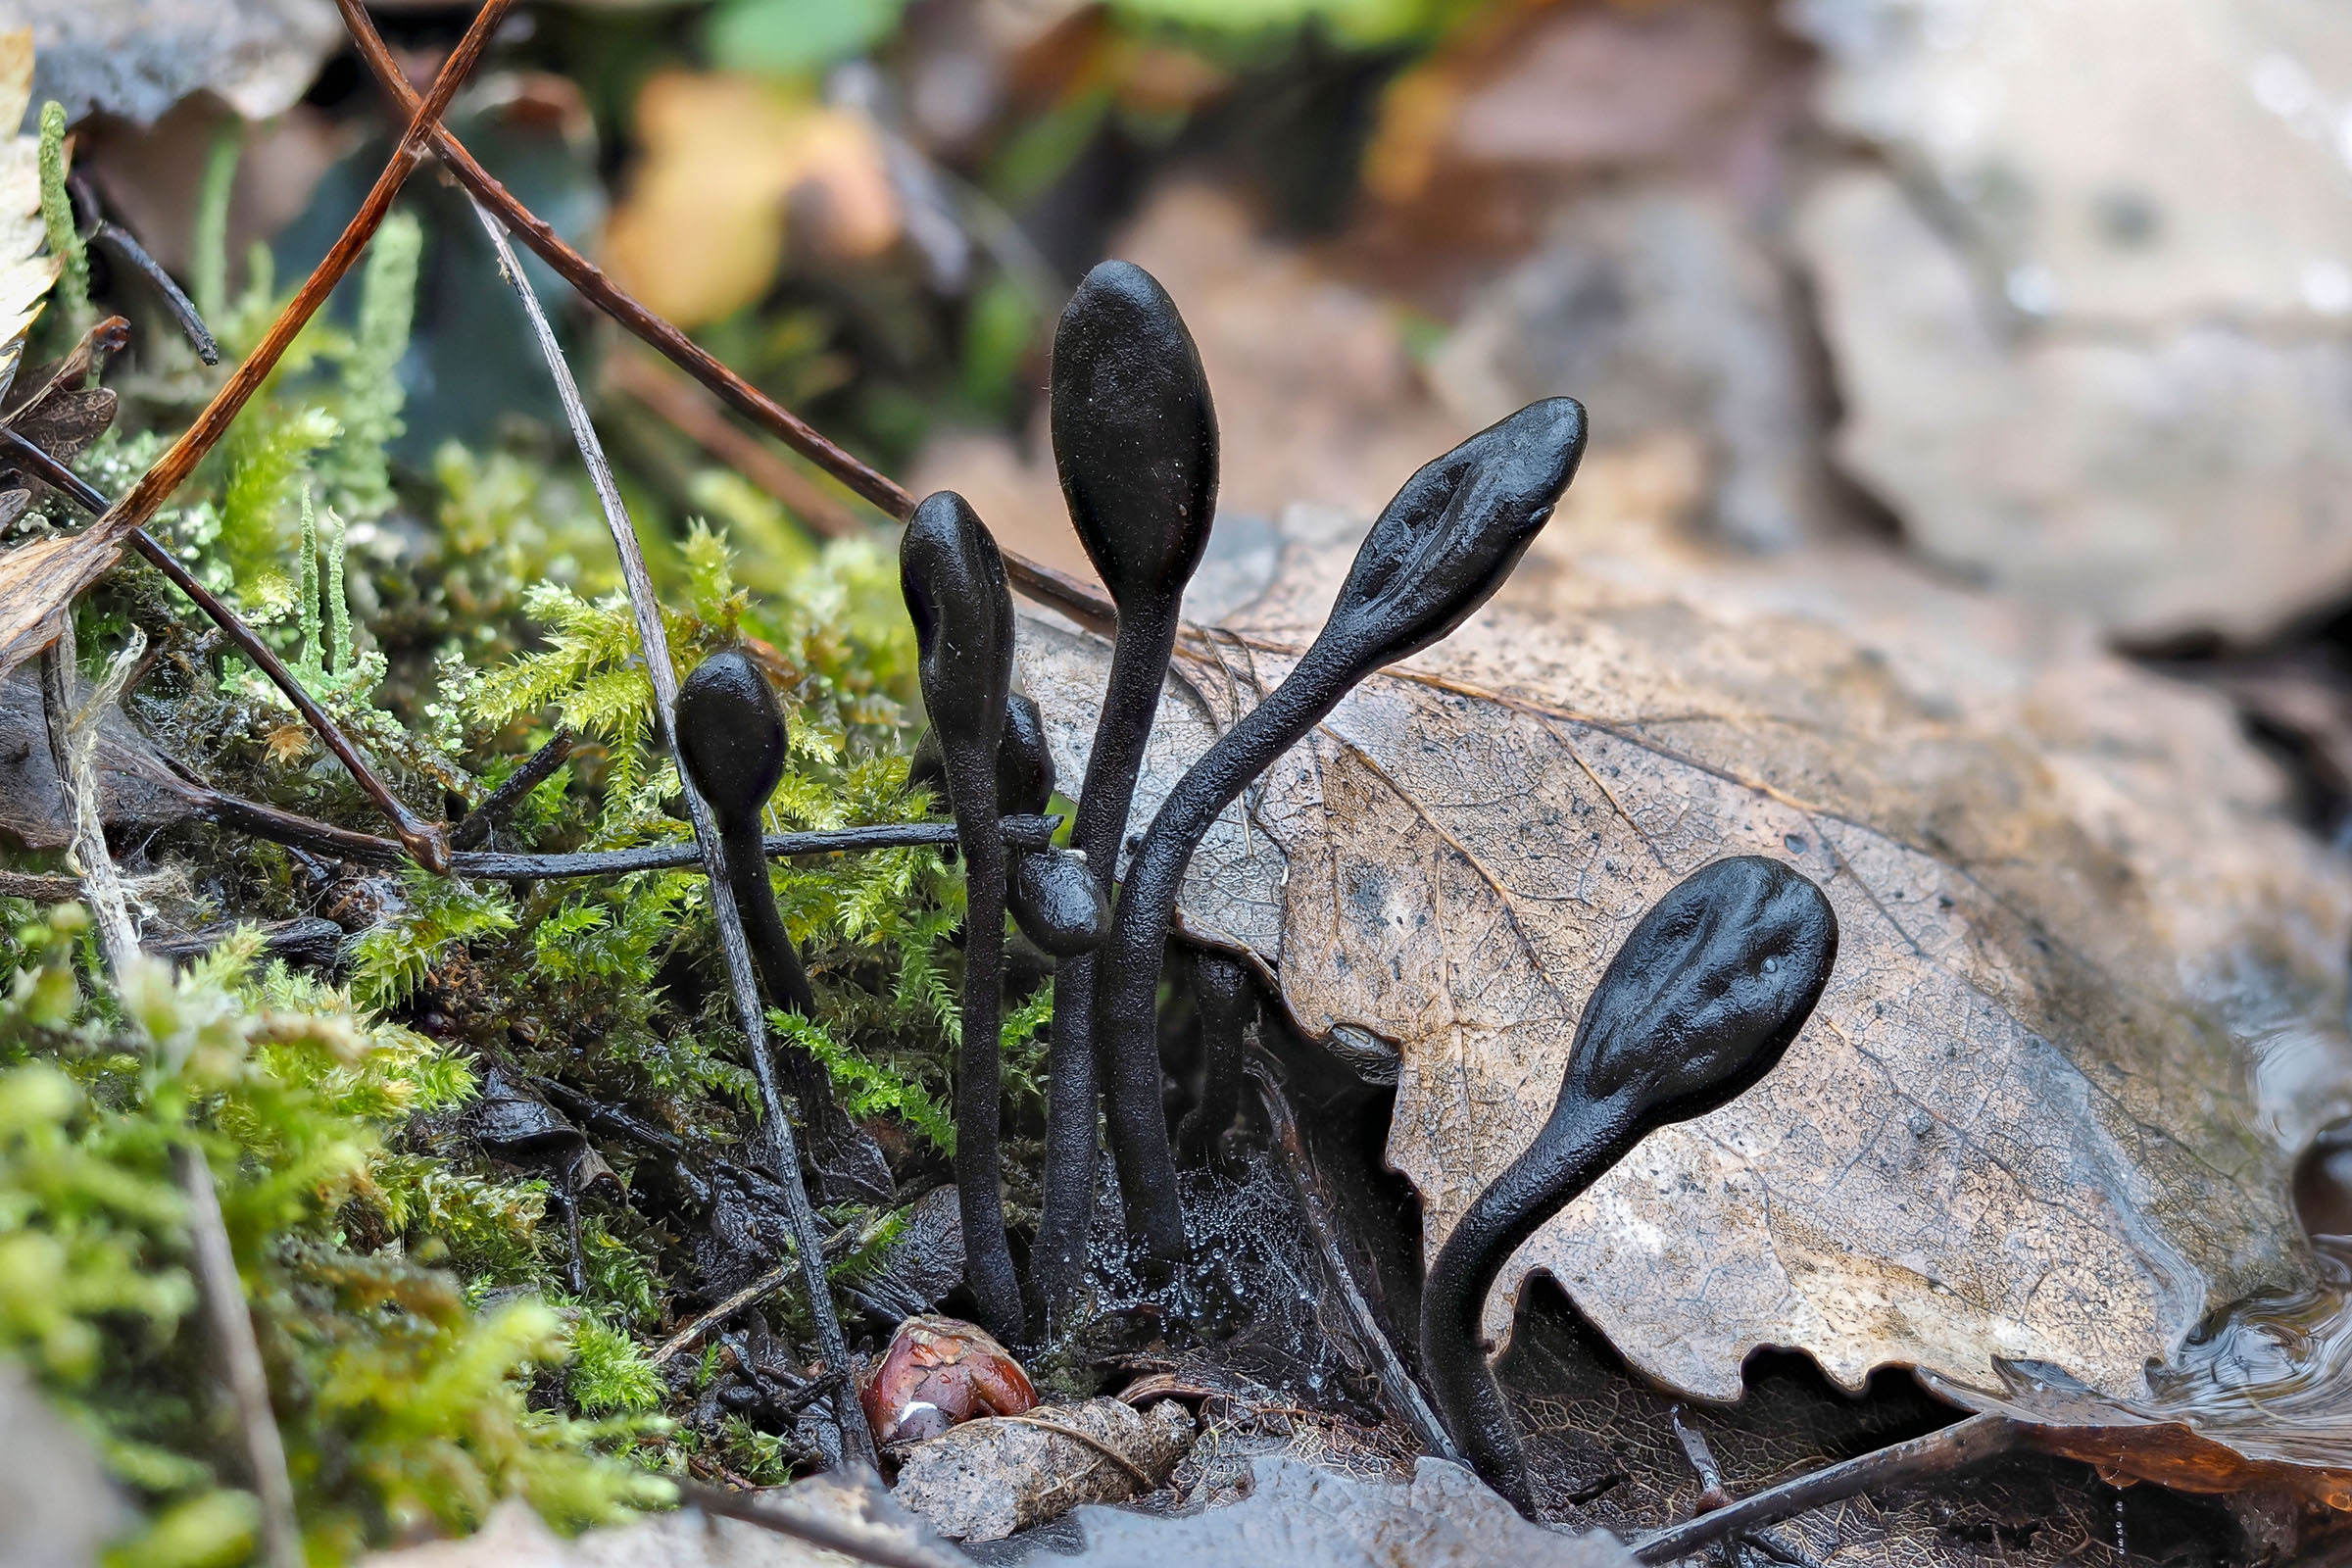 earth tongue, one of a new branch of fungi